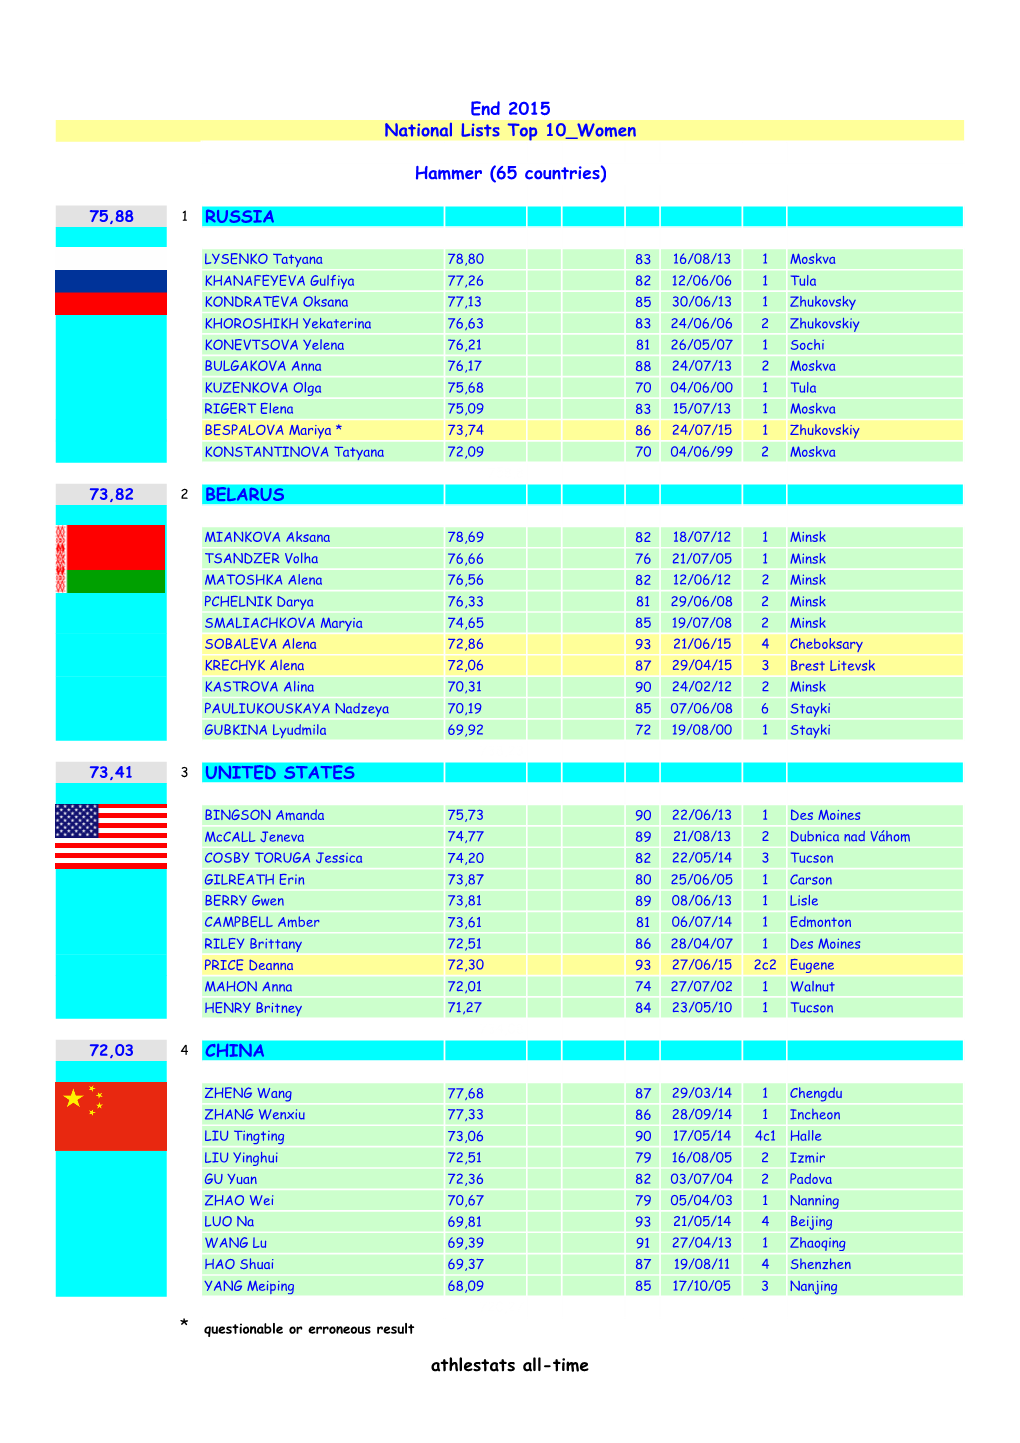 RUSSIA BELARUS UNITED STATES CHINA End 2015 National Lists Top